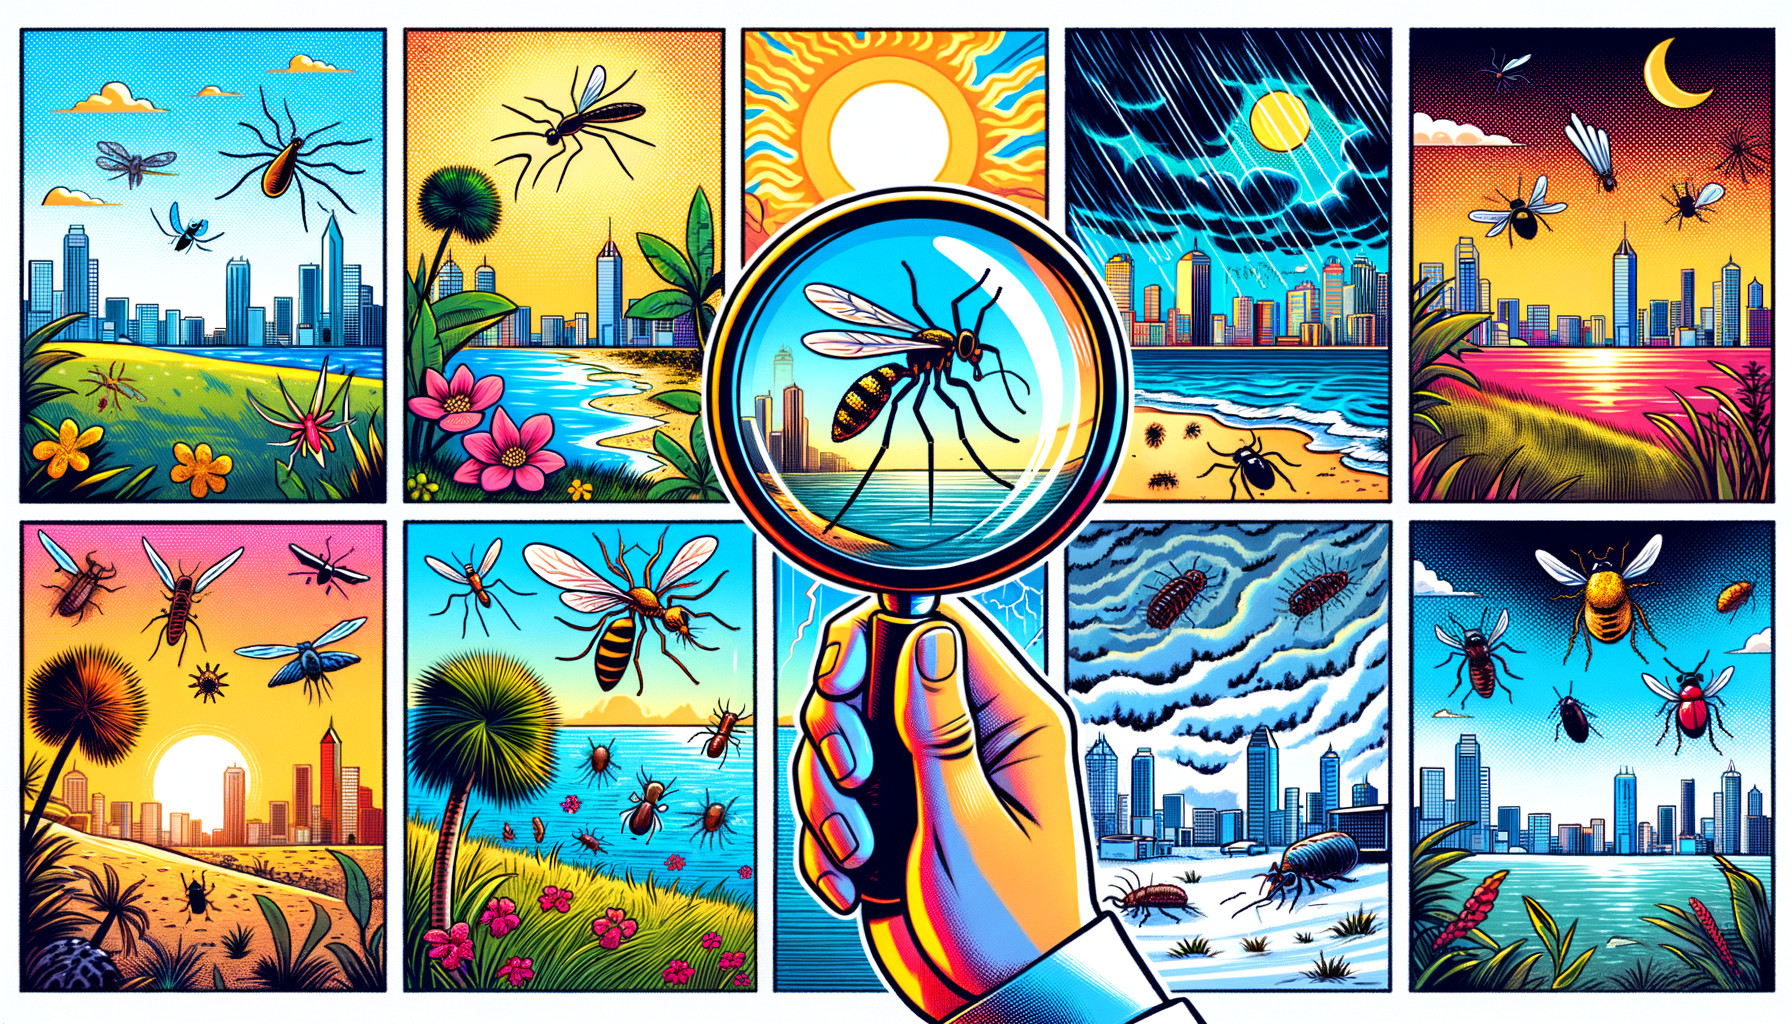 Comic-style insect illustrations with cityscape backgrounds.